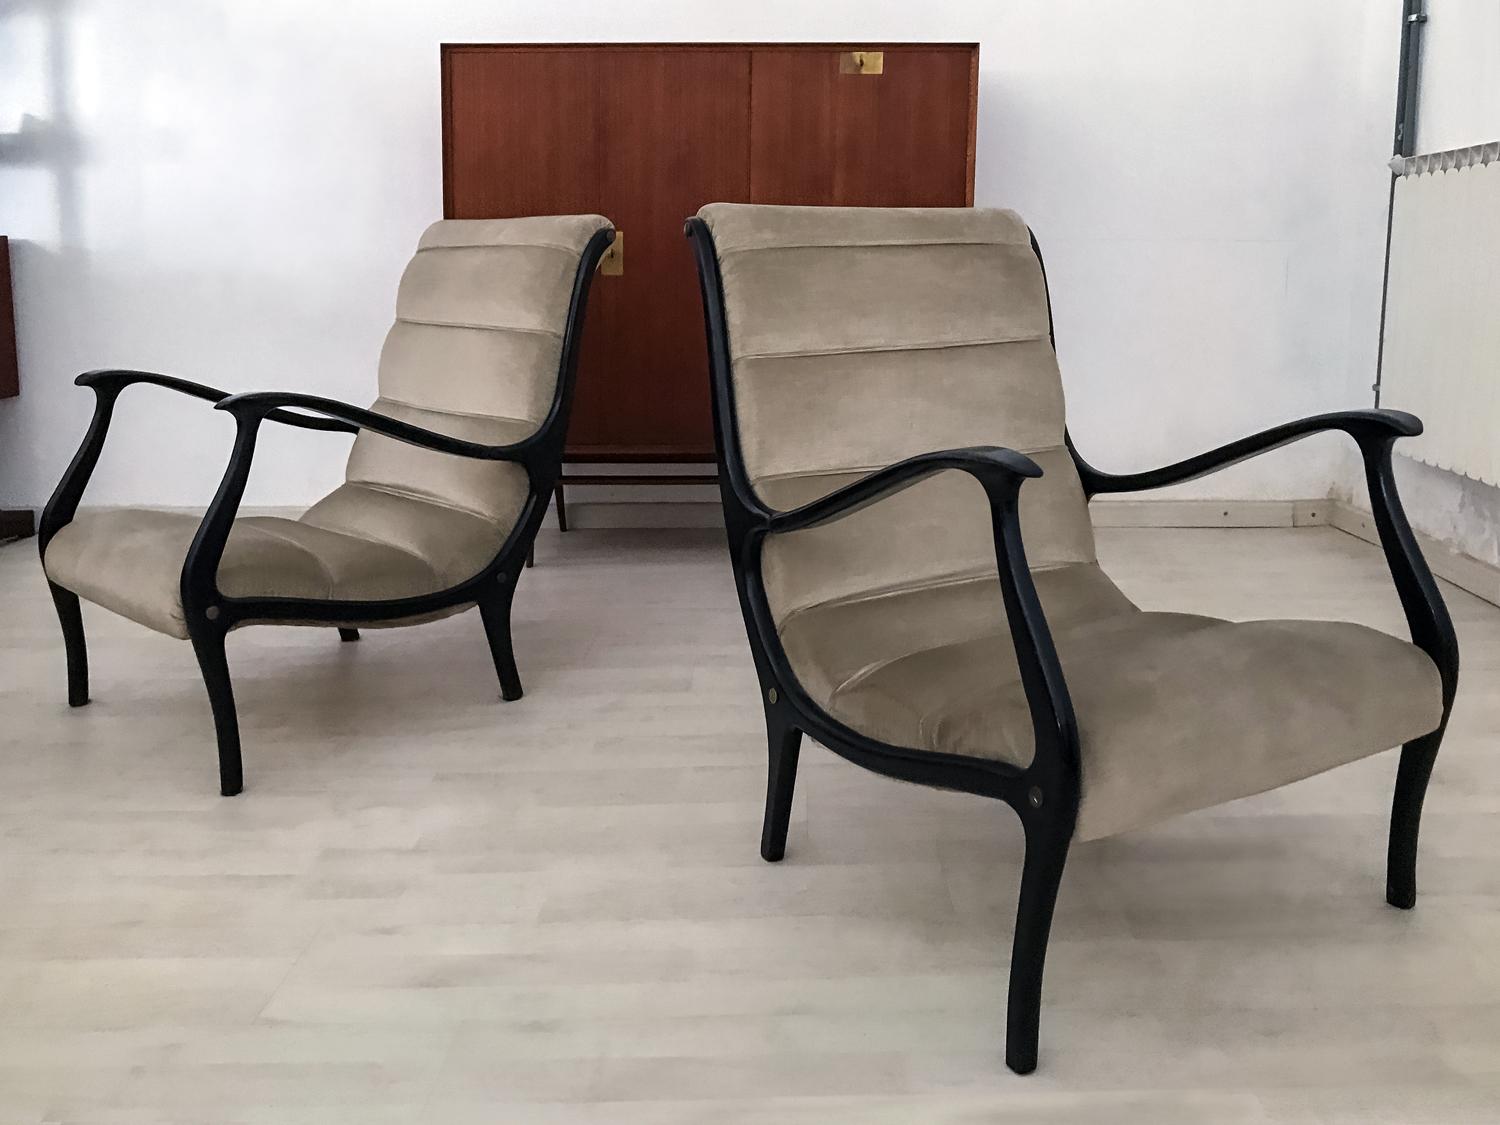 Stylish pair of bentwood armchairs ’Mitzi’, well designed by Ezio Longhi for Elam in the 1950s.

Their seats are upholstered in velvet ice grey color, in very good conditions of the period, without defects such as stains, tearing or scraping.
Even